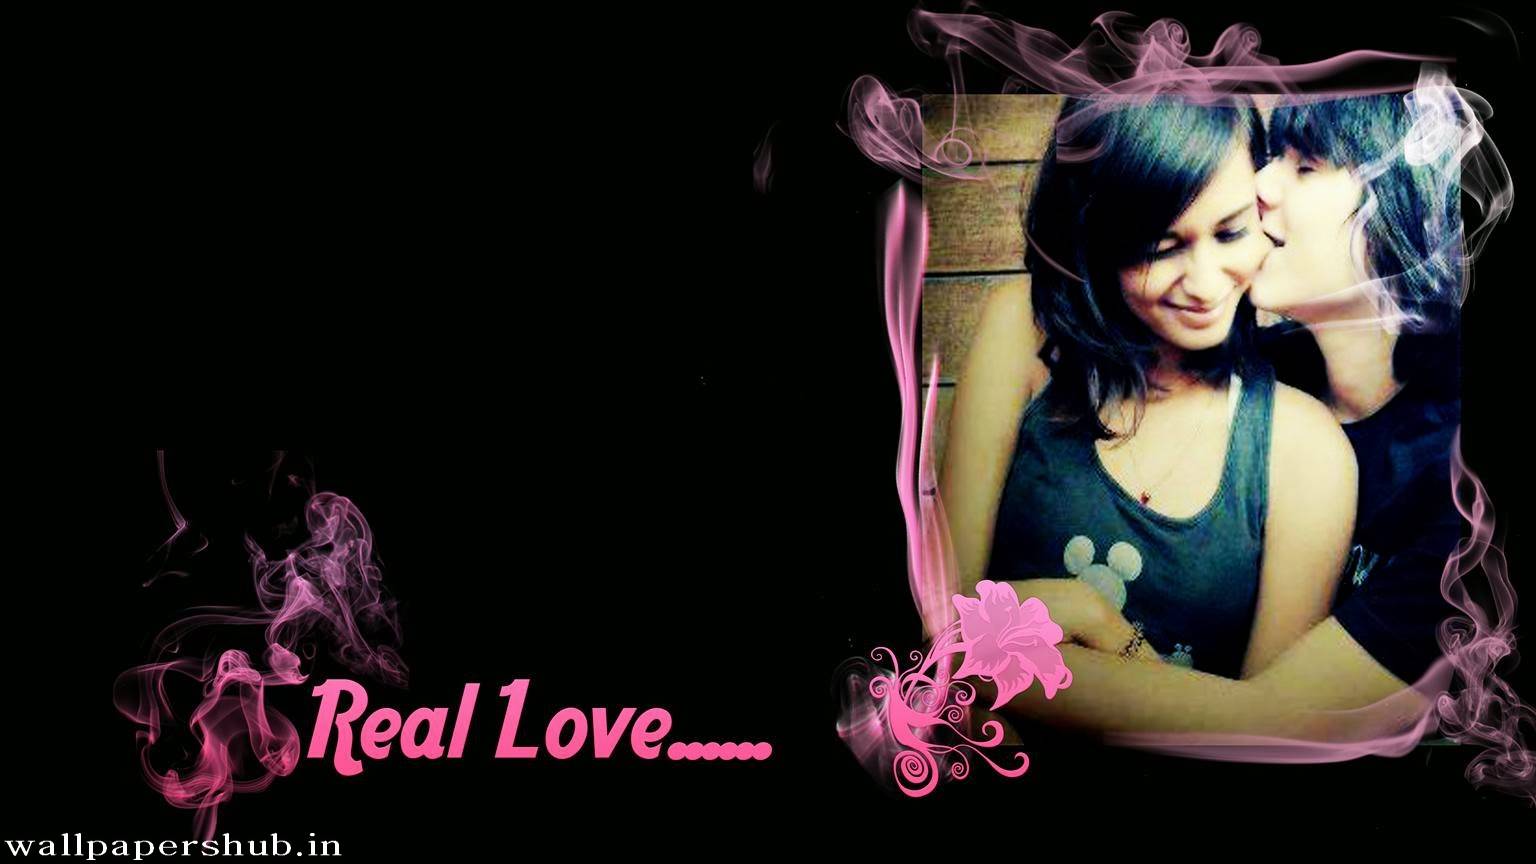 Download Real Love Full HD Wallpaper For Laptop